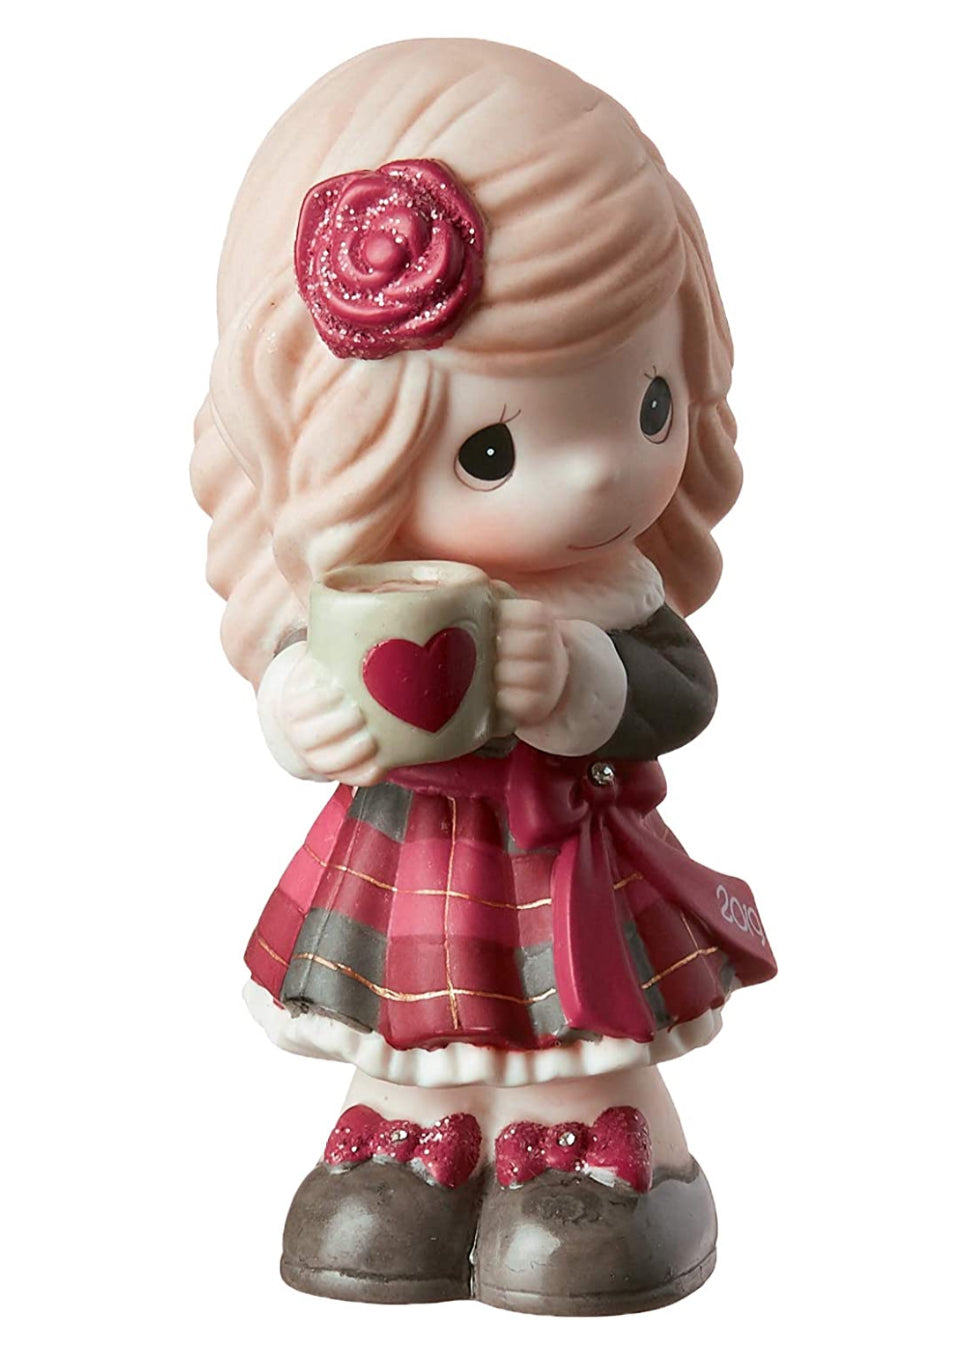 Have A Heart-Warming Christmas - 2019 Dated Annual Precious Moment Figurine